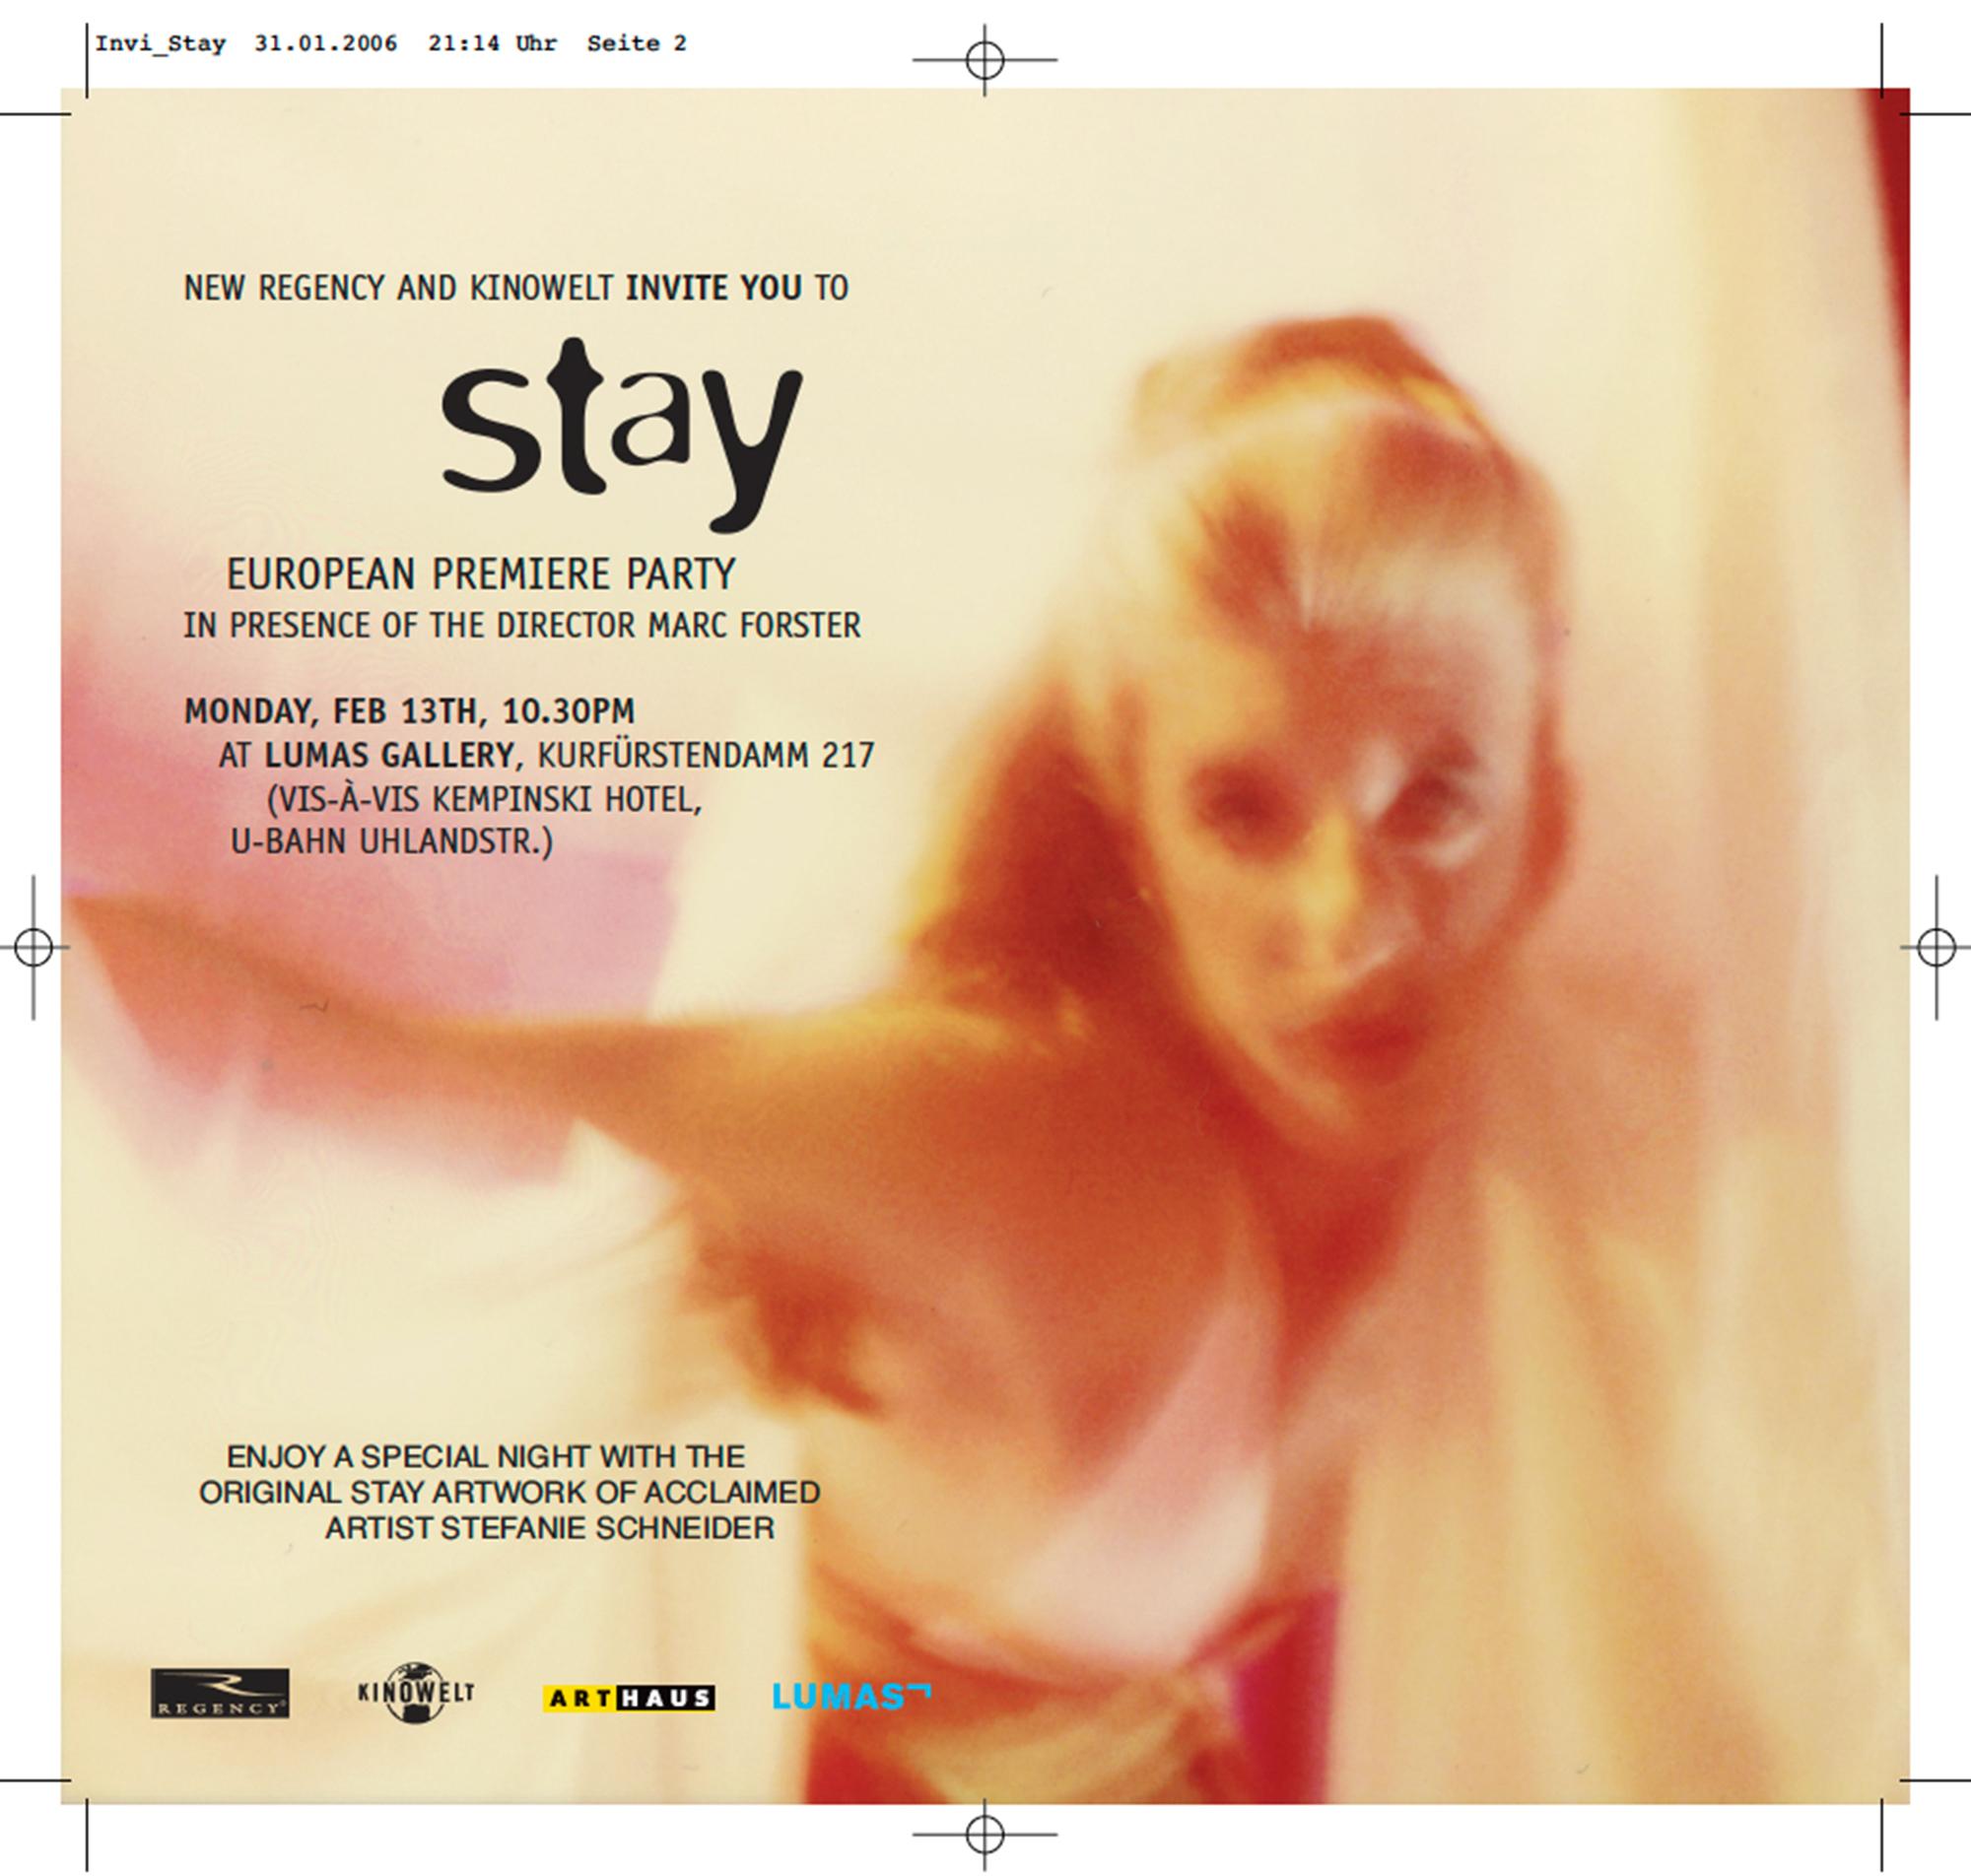 Stefanie Schneider's work was used for Marc Forster's movie 'Stay'. Featuring Ewan McGregor, Naomi Watts and Ryan Gosling. Naomi and Ryan were both portraying artists and Stefanie's art was the art both created during the movie. Stefanie's images